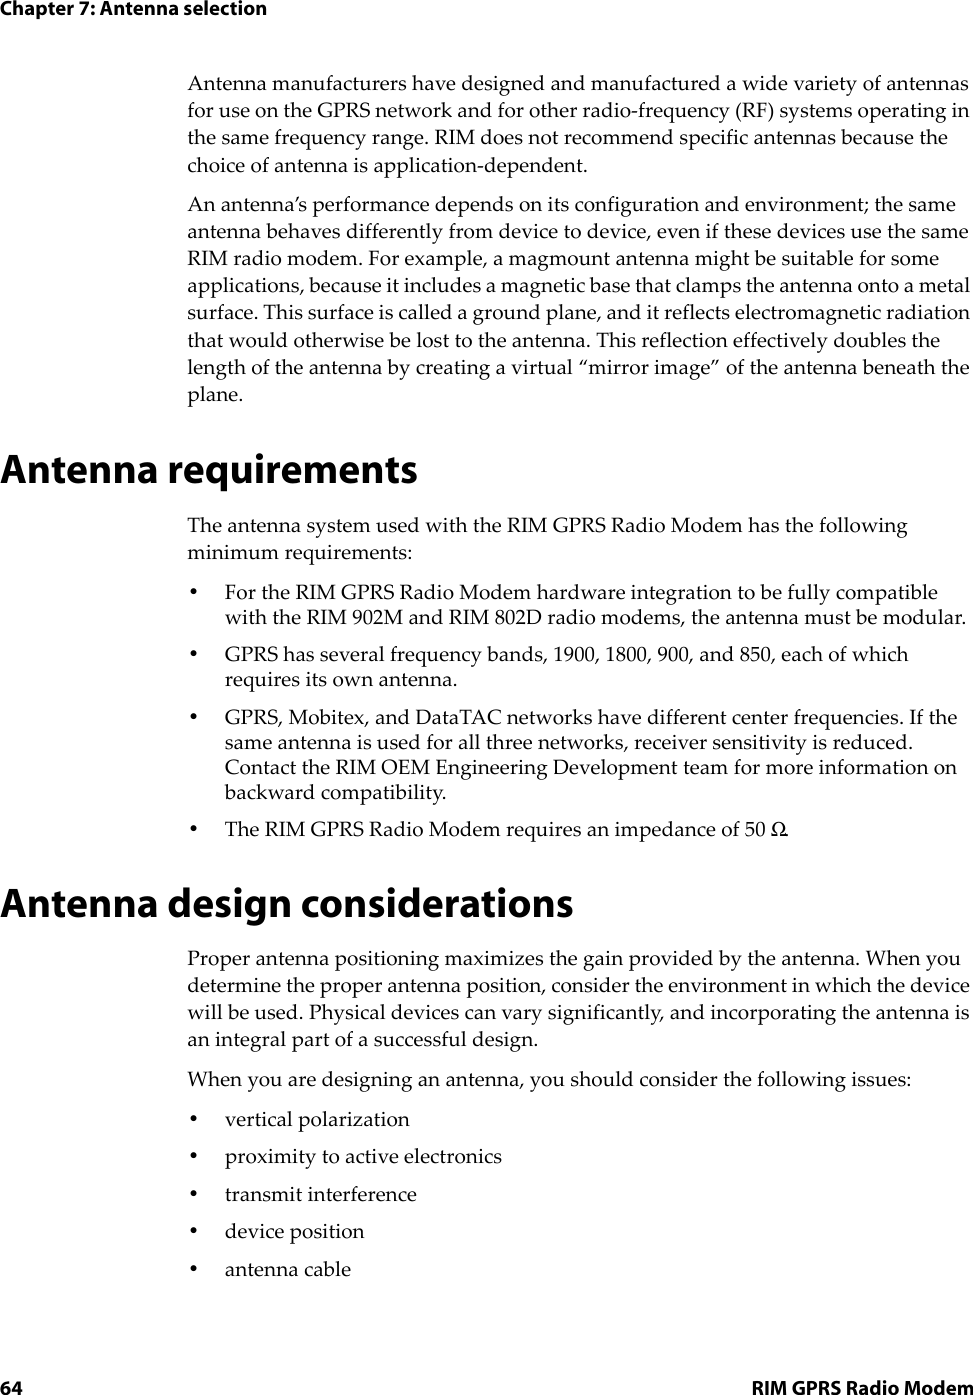 Chapter 7: Antenna selection64 RIM GPRS Radio ModemAntenna manufacturers have designed and manufactured a wide variety of antennas for use on the GPRS network and for other radio-frequency (RF) systems operating in the same frequency range. RIM does not recommend specific antennas because the choice of antenna is application-dependent.An antenna’s performance depends on its configuration and environment; the same antenna behaves differently from device to device, even if these devices use the same RIM radio modem. For example, a magmount antenna might be suitable for some applications, because it includes a magnetic base that clamps the antenna onto a metal surface. This surface is called a ground plane, and it reflects electromagnetic radiation that would otherwise be lost to the antenna. This reflection effectively doubles the length of the antenna by creating a virtual “mirror image” of the antenna beneath the plane.Antenna requirementsThe antenna system used with the RIM GPRS Radio Modem has the following minimum requirements:•For the RIM GPRS Radio Modem hardware integration to be fully compatible with the RIM 902M and RIM 802D radio modems, the antenna must be modular.•GPRS has several frequency bands, 1900, 1800, 900, and 850, each of which requires its own antenna.•GPRS, Mobitex, and DataTAC networks have different center frequencies. If the same antenna is used for all three networks, receiver sensitivity is reduced. Contact the RIM OEM Engineering Development team for more information on backward compatibility.•The RIM GPRS Radio Modem requires an impedance of 50 Ω.Antenna design considerationsProper antenna positioning maximizes the gain provided by the antenna. When you determine the proper antenna position, consider the environment in which the device will be used. Physical devices can vary significantly, and incorporating the antenna is an integral part of a successful design.When you are designing an antenna, you should consider the following issues:•vertical polarization•proximity to active electronics•transmit interference•device position•antenna cable